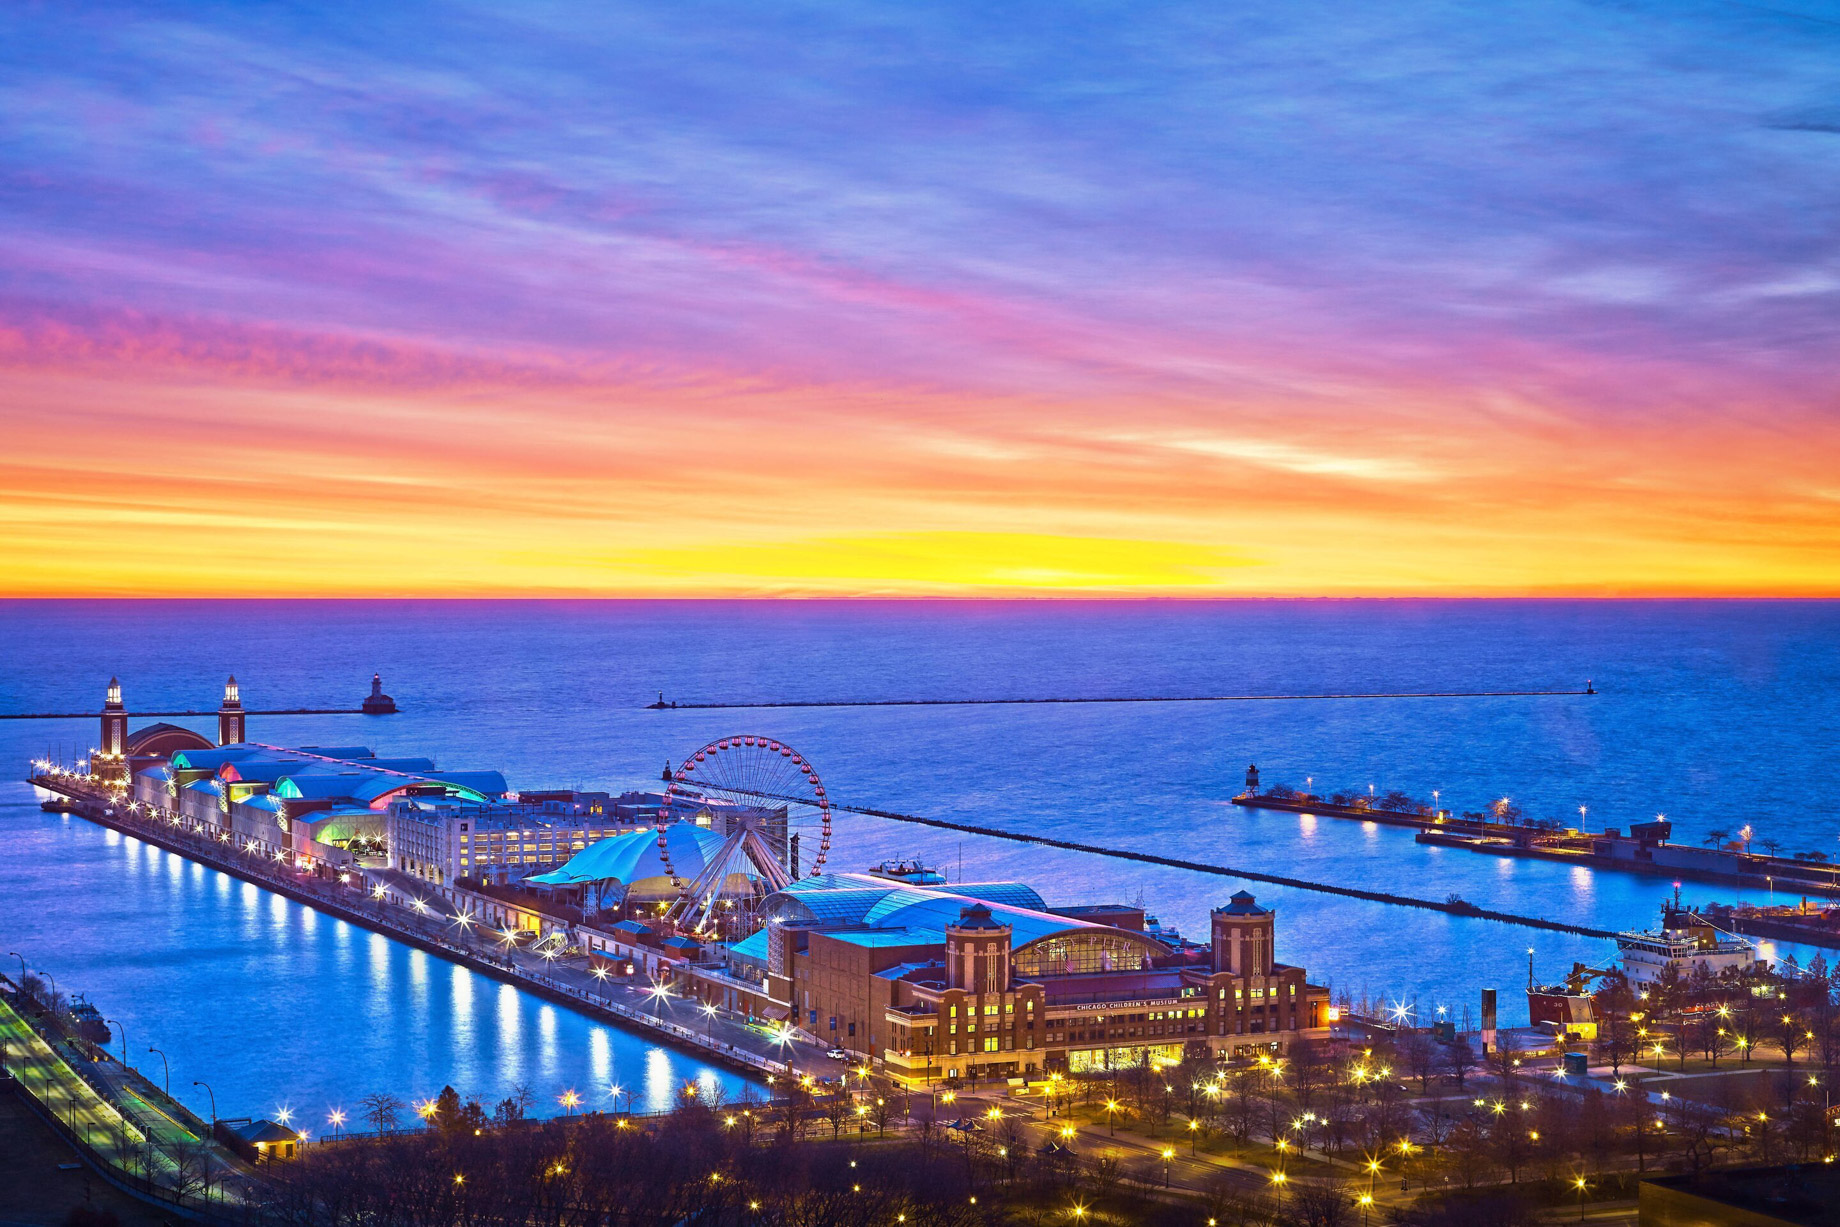 W Chicago Lakeshore Hotel – Chicago, IL, USA – Sunset View